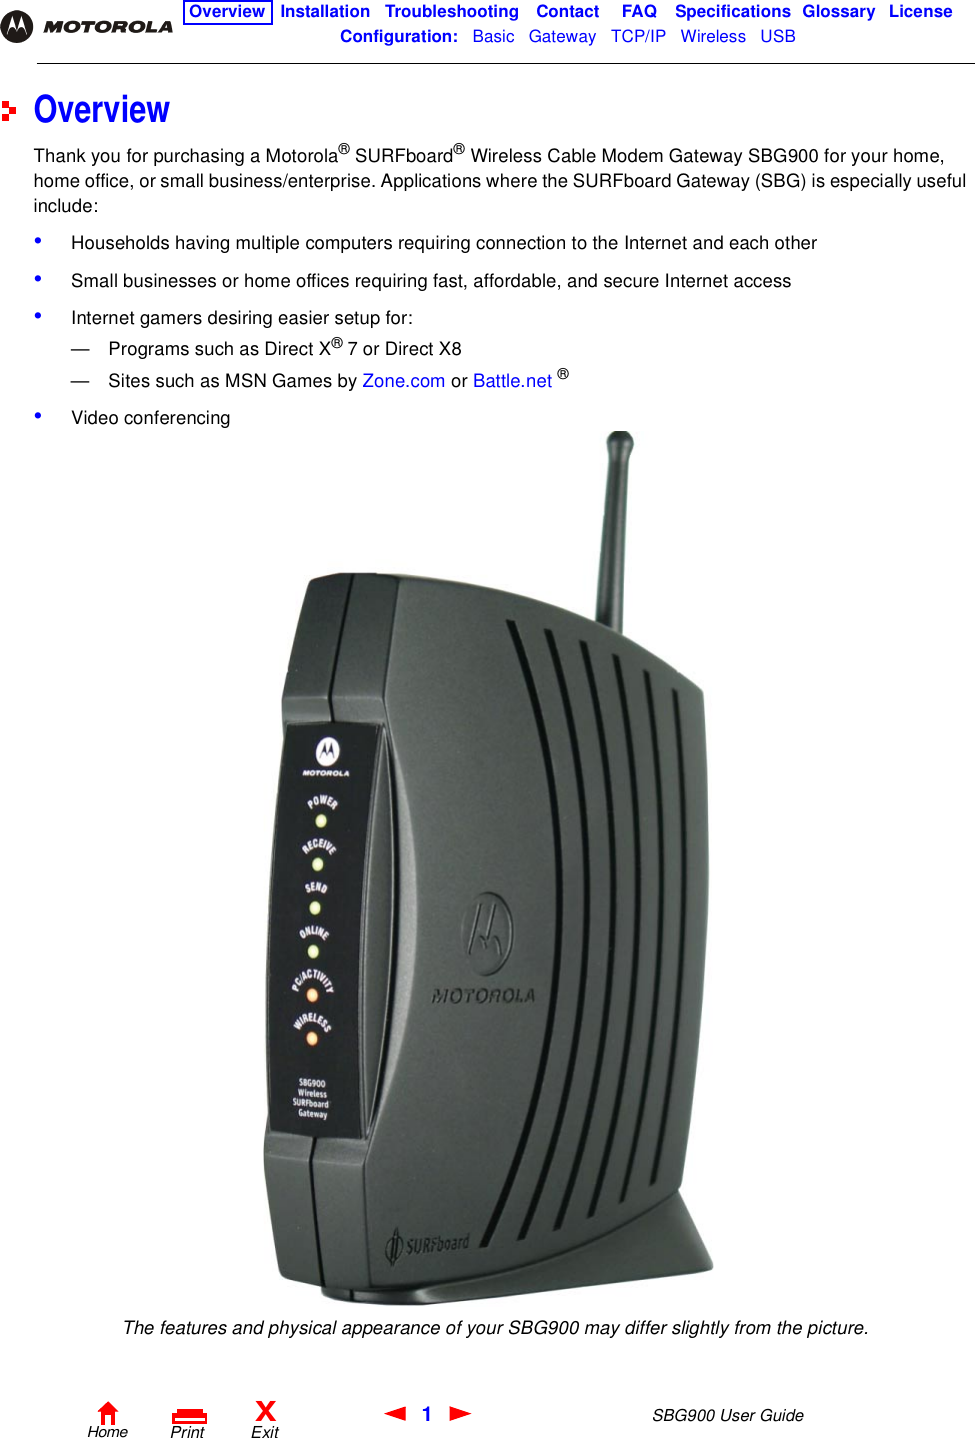 1SBG900 User GuideHomeXExitPrintOverview Installation Troubleshooting Contact FAQ Specifications Glossary LicenseConfiguration:   Basic   Gateway   TCP/IP   Wireless   USB   OverviewThank you for purchasing a Motorola® SURFboard® Wireless Cable Modem Gateway SBG900 for your home, home office, or small business/enterprise. Applications where the SURFboard Gateway (SBG) is especially useful include:•Households having multiple computers requiring connection to the Internet and each other•Small businesses or home offices requiring fast, affordable, and secure Internet access•Internet gamers desiring easier setup for:— Programs such as Direct X® 7 or Direct X8— Sites such as MSN Games by Zone.com or Battle.net ®•Video conferencingThe features and physical appearance of your SBG900 may differ slightly from the picture.